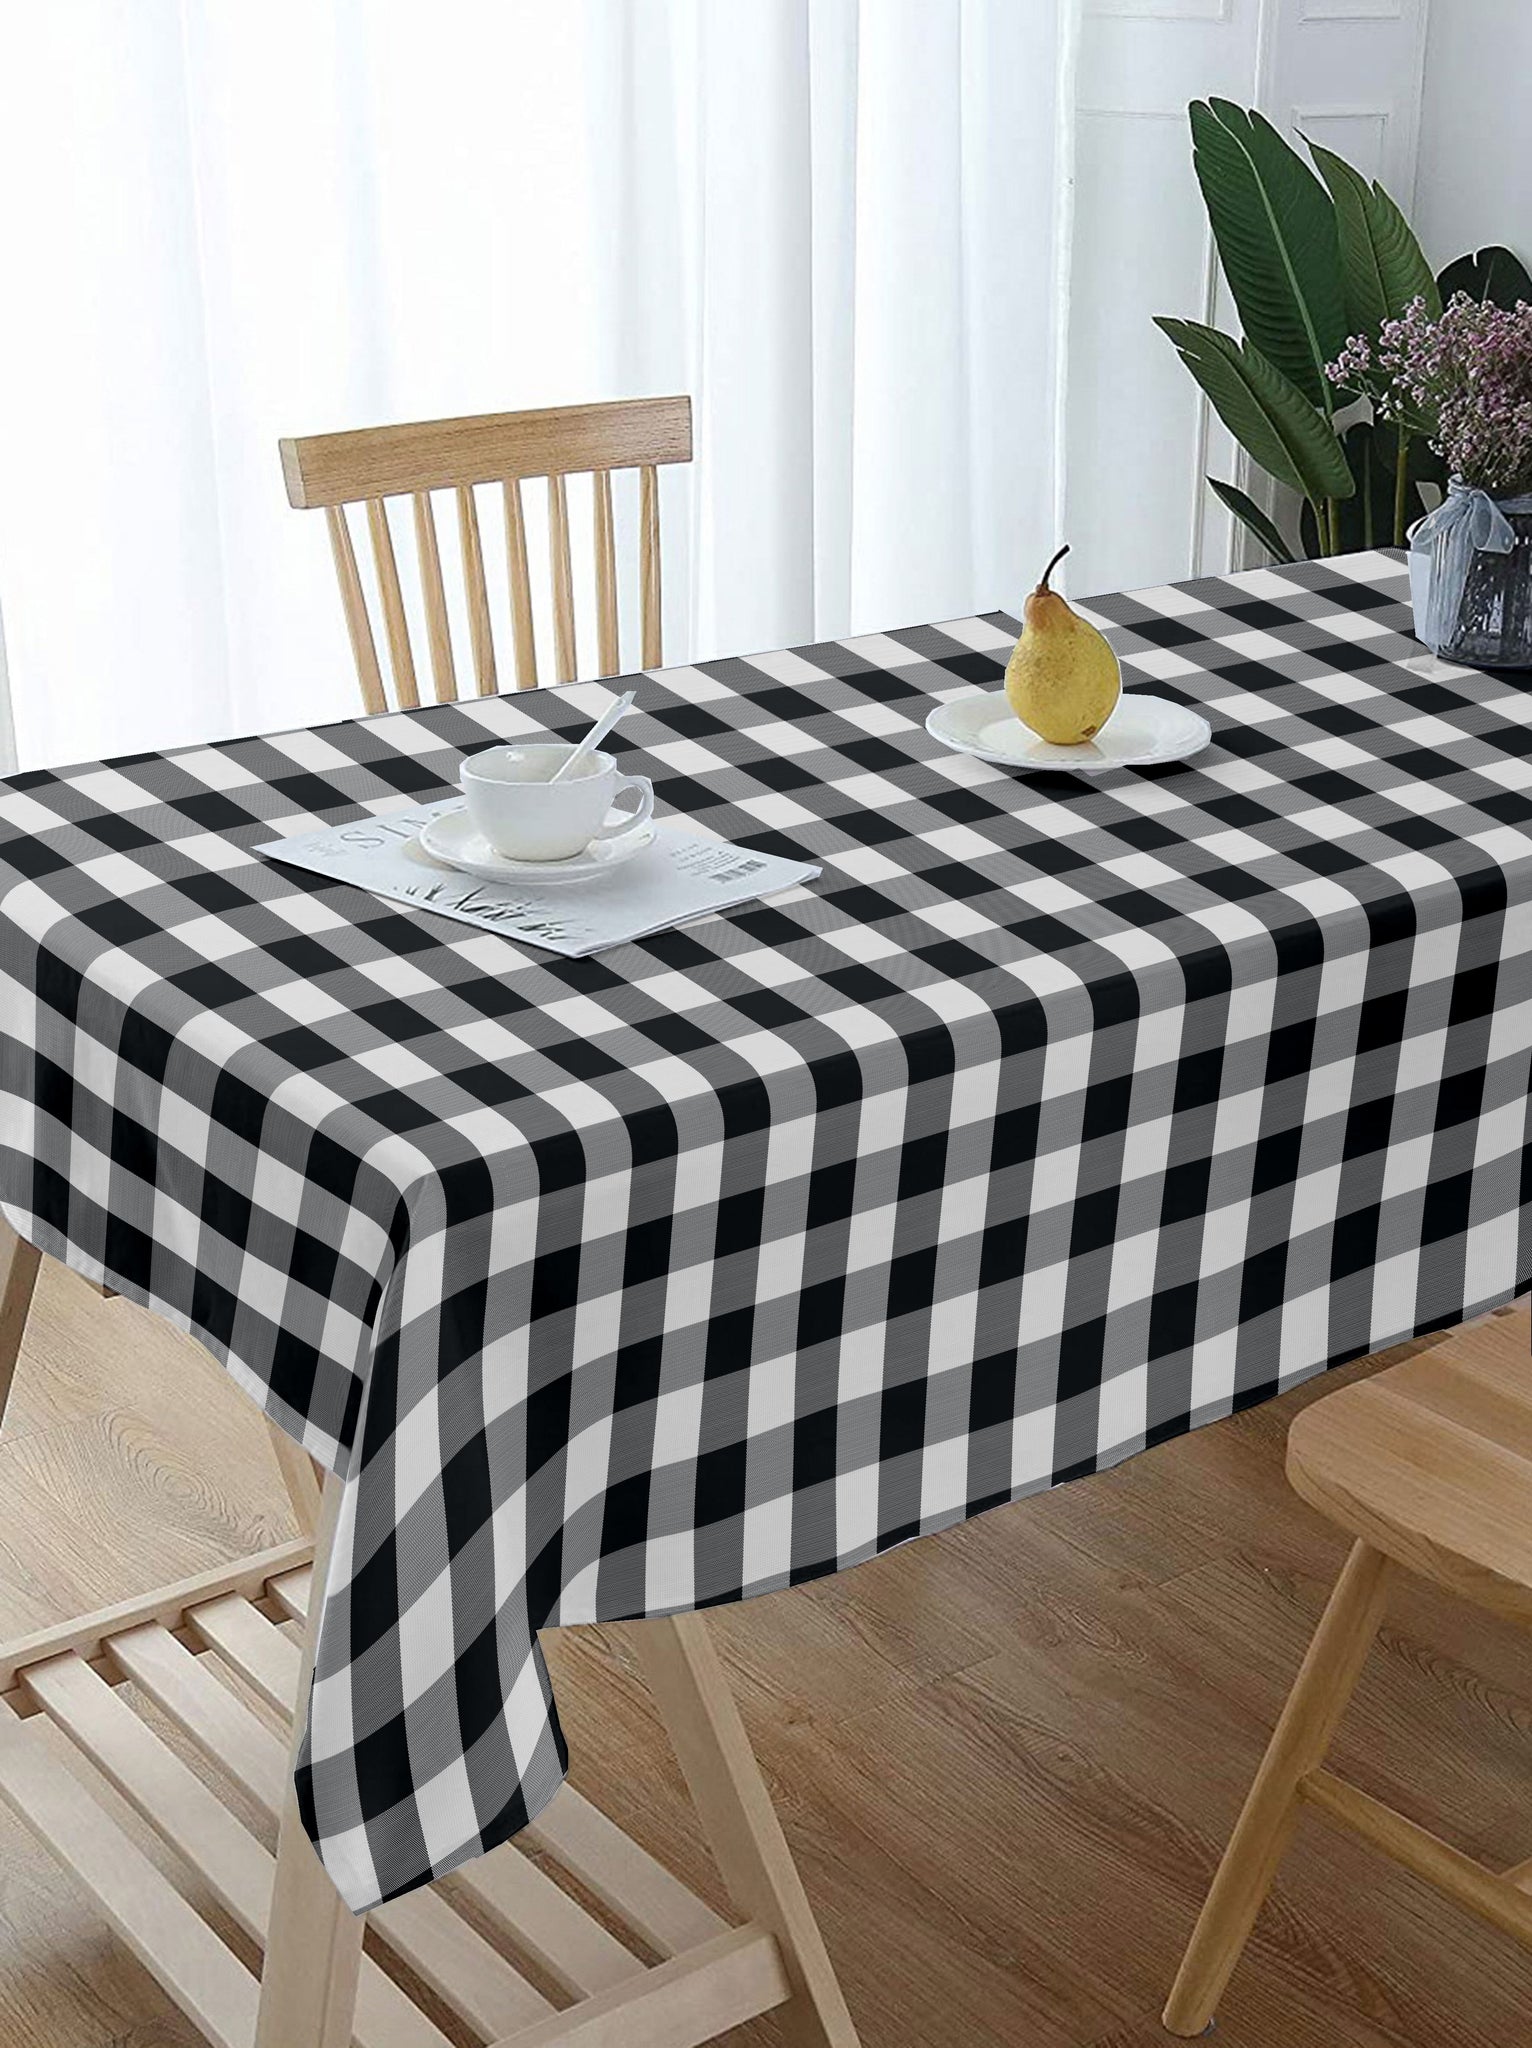 Lushomes table cover, Buffalo Checks Black Plaid Dining Table Cover Cloth, home decor items (Size 36 x 60 Inches , Center Table Cloth)